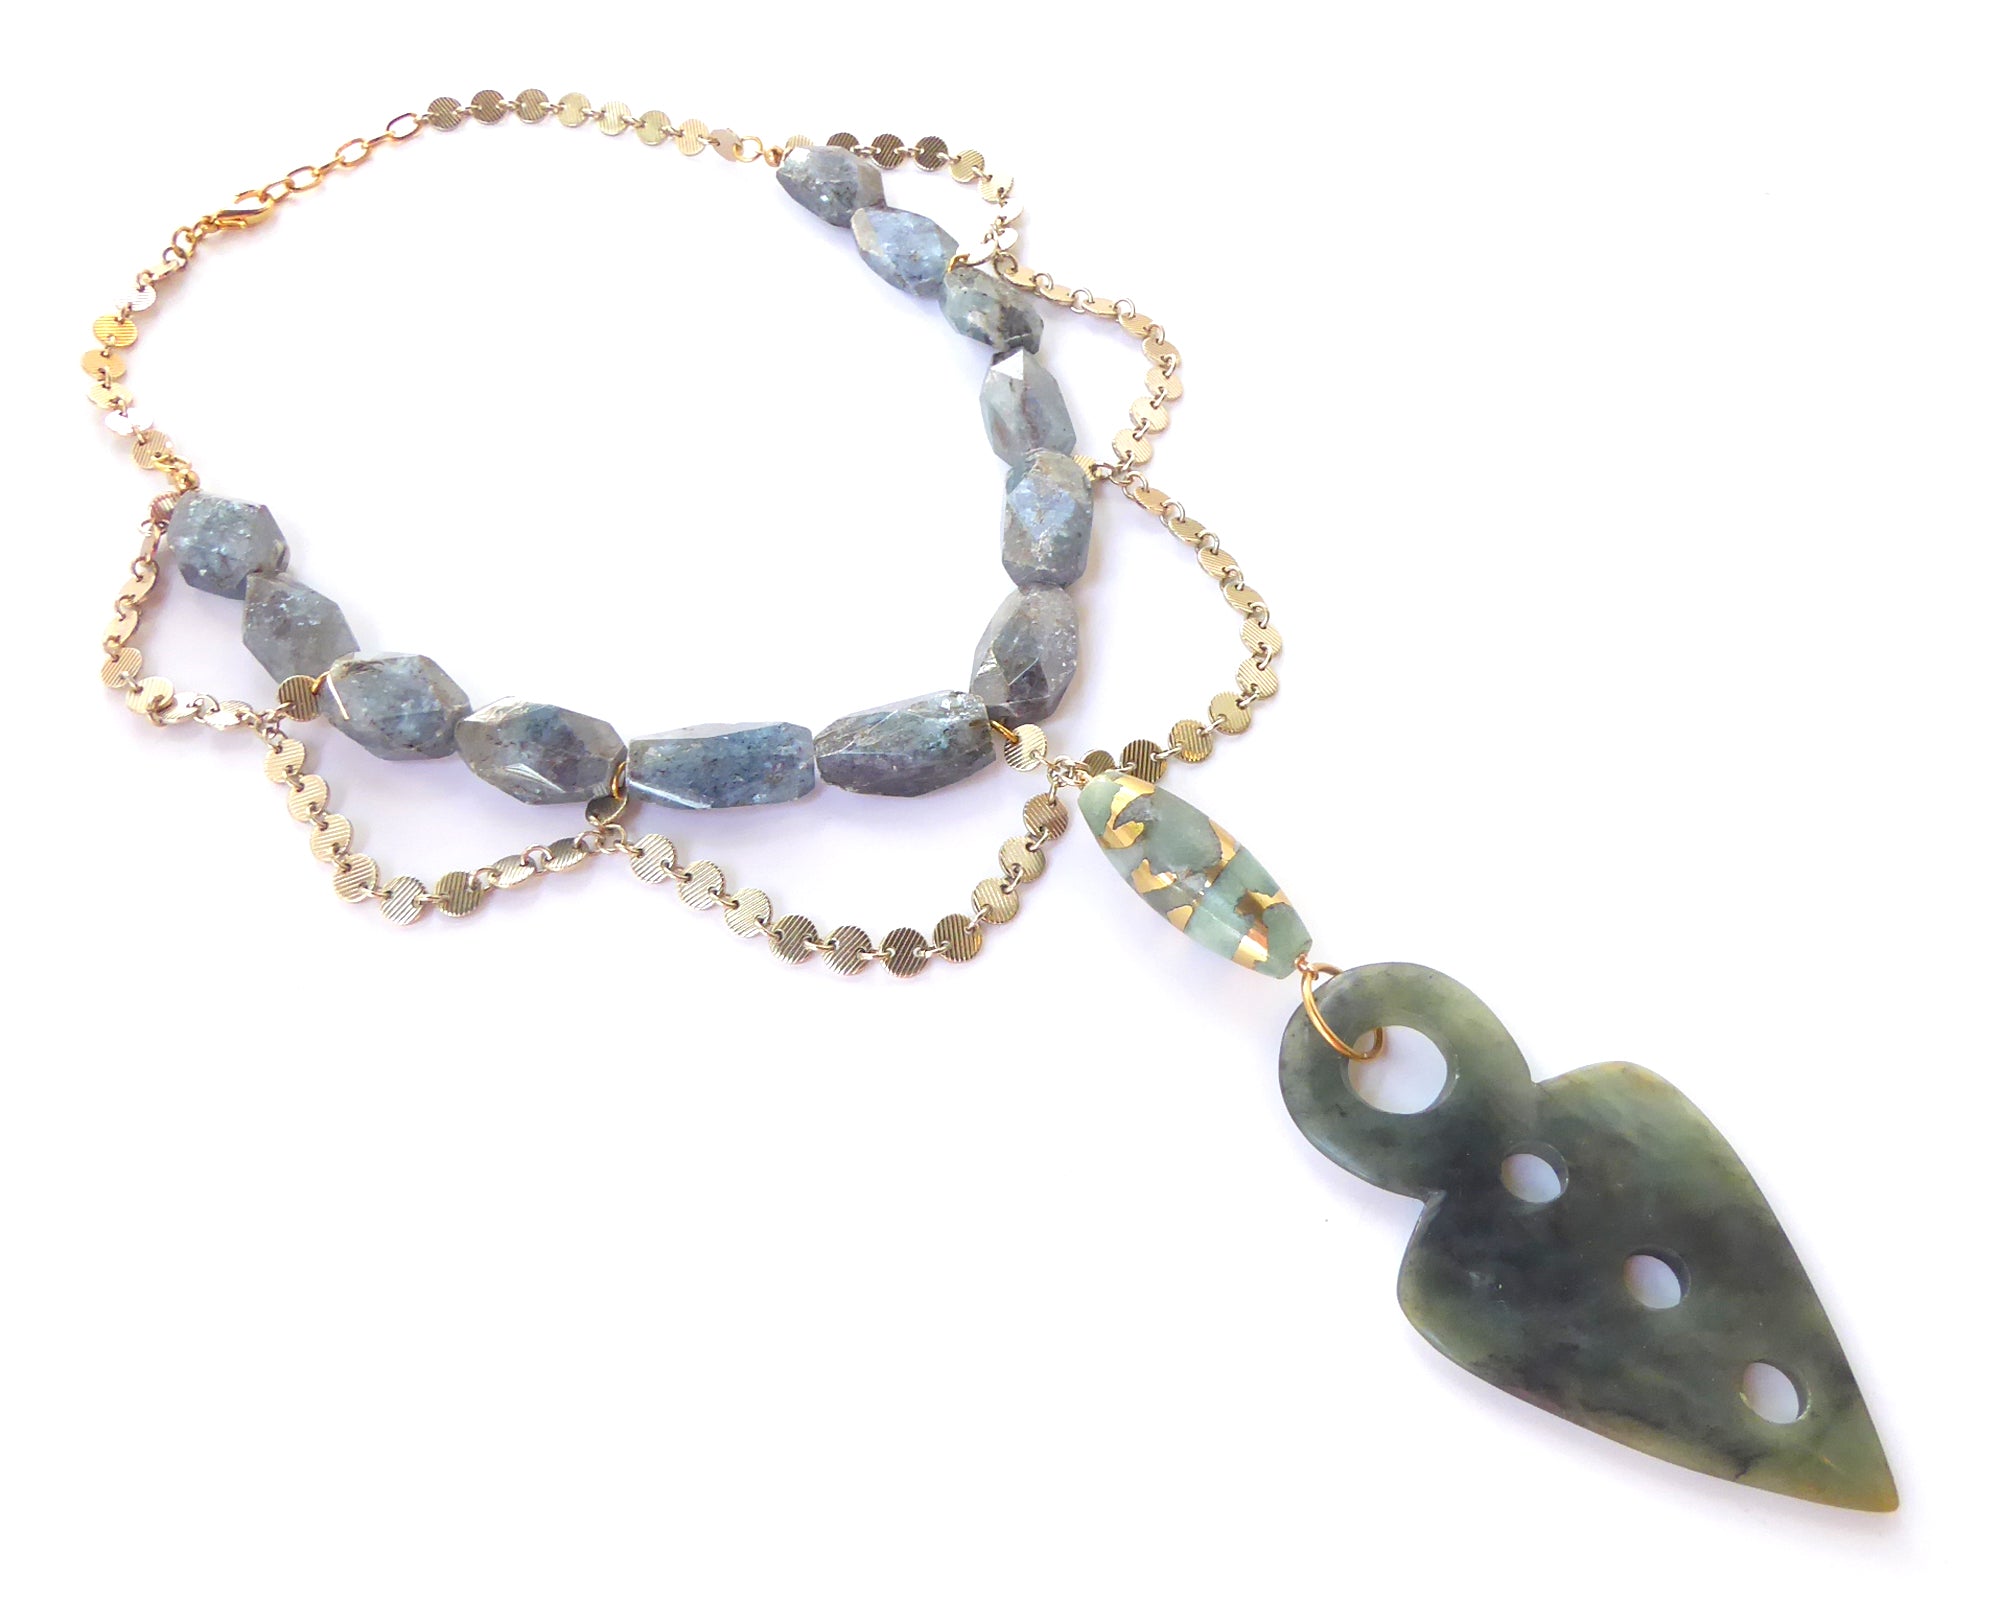 Serpentine spearhead necklace by Jenny Dayco 2